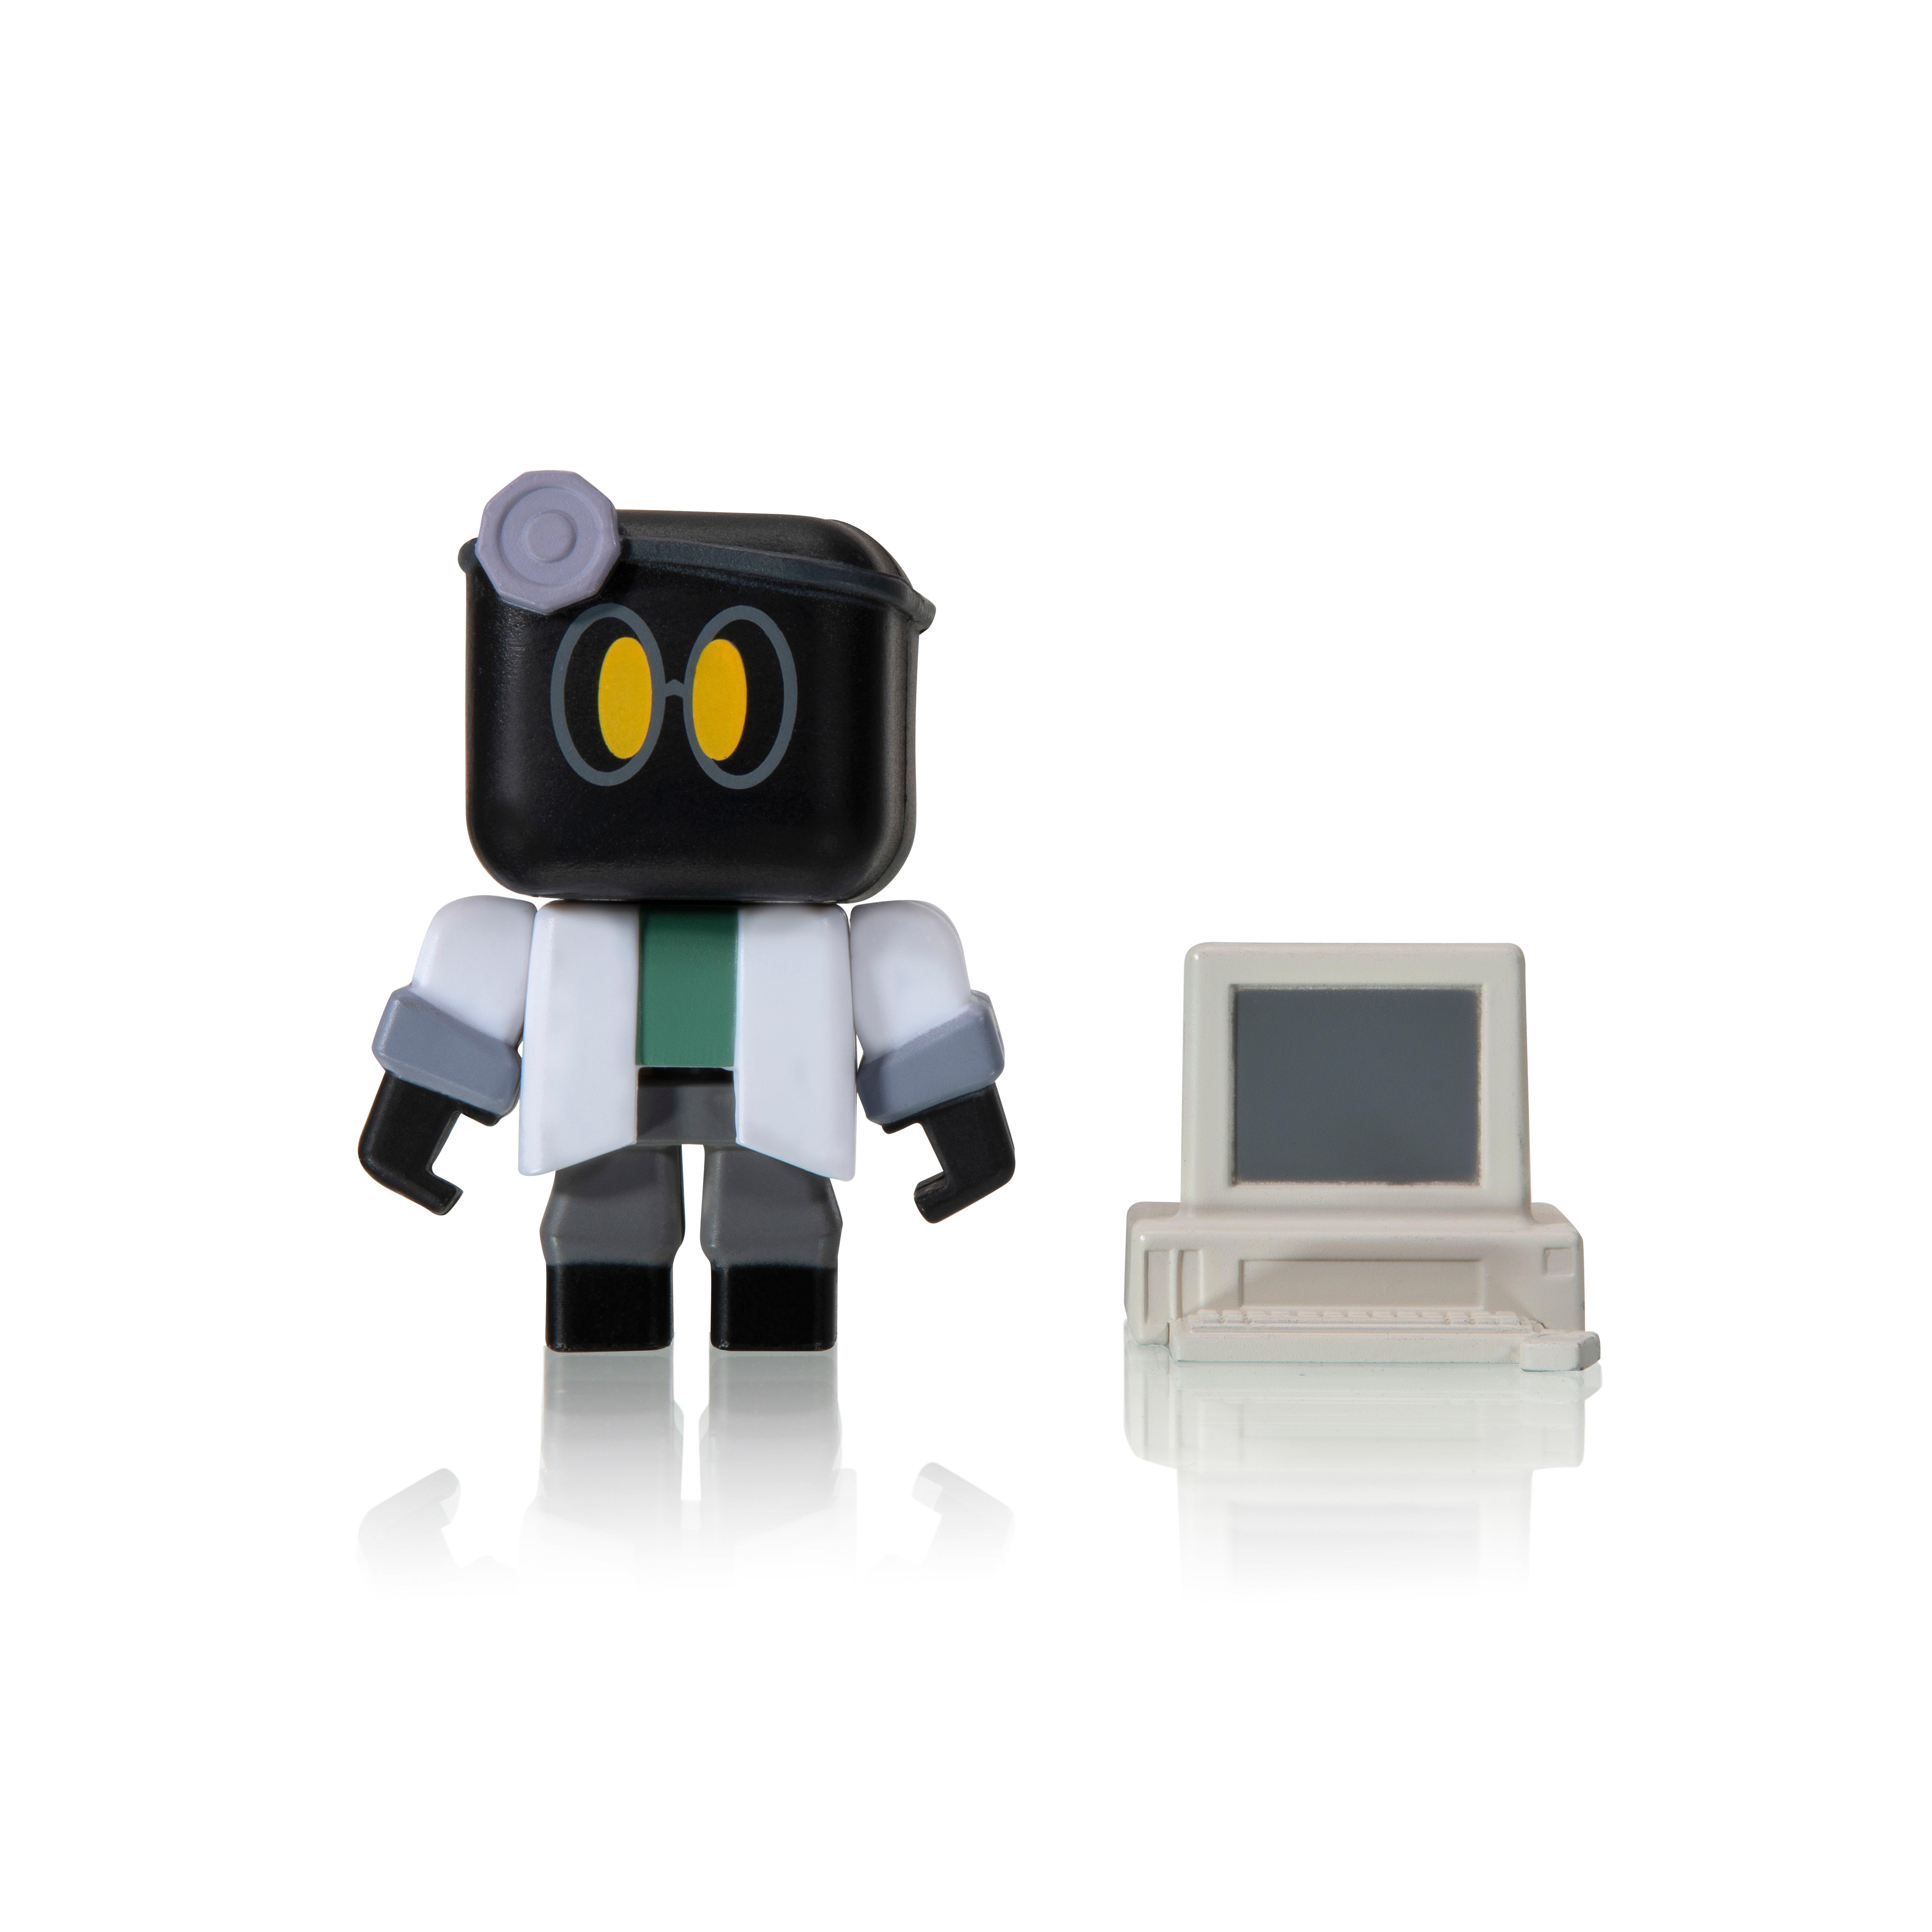 Roblox Action Collection Series 8 Mystery Figure Includes 1 Figure And Exclusive Virtual Item Gamestop - virtual item roblox toys